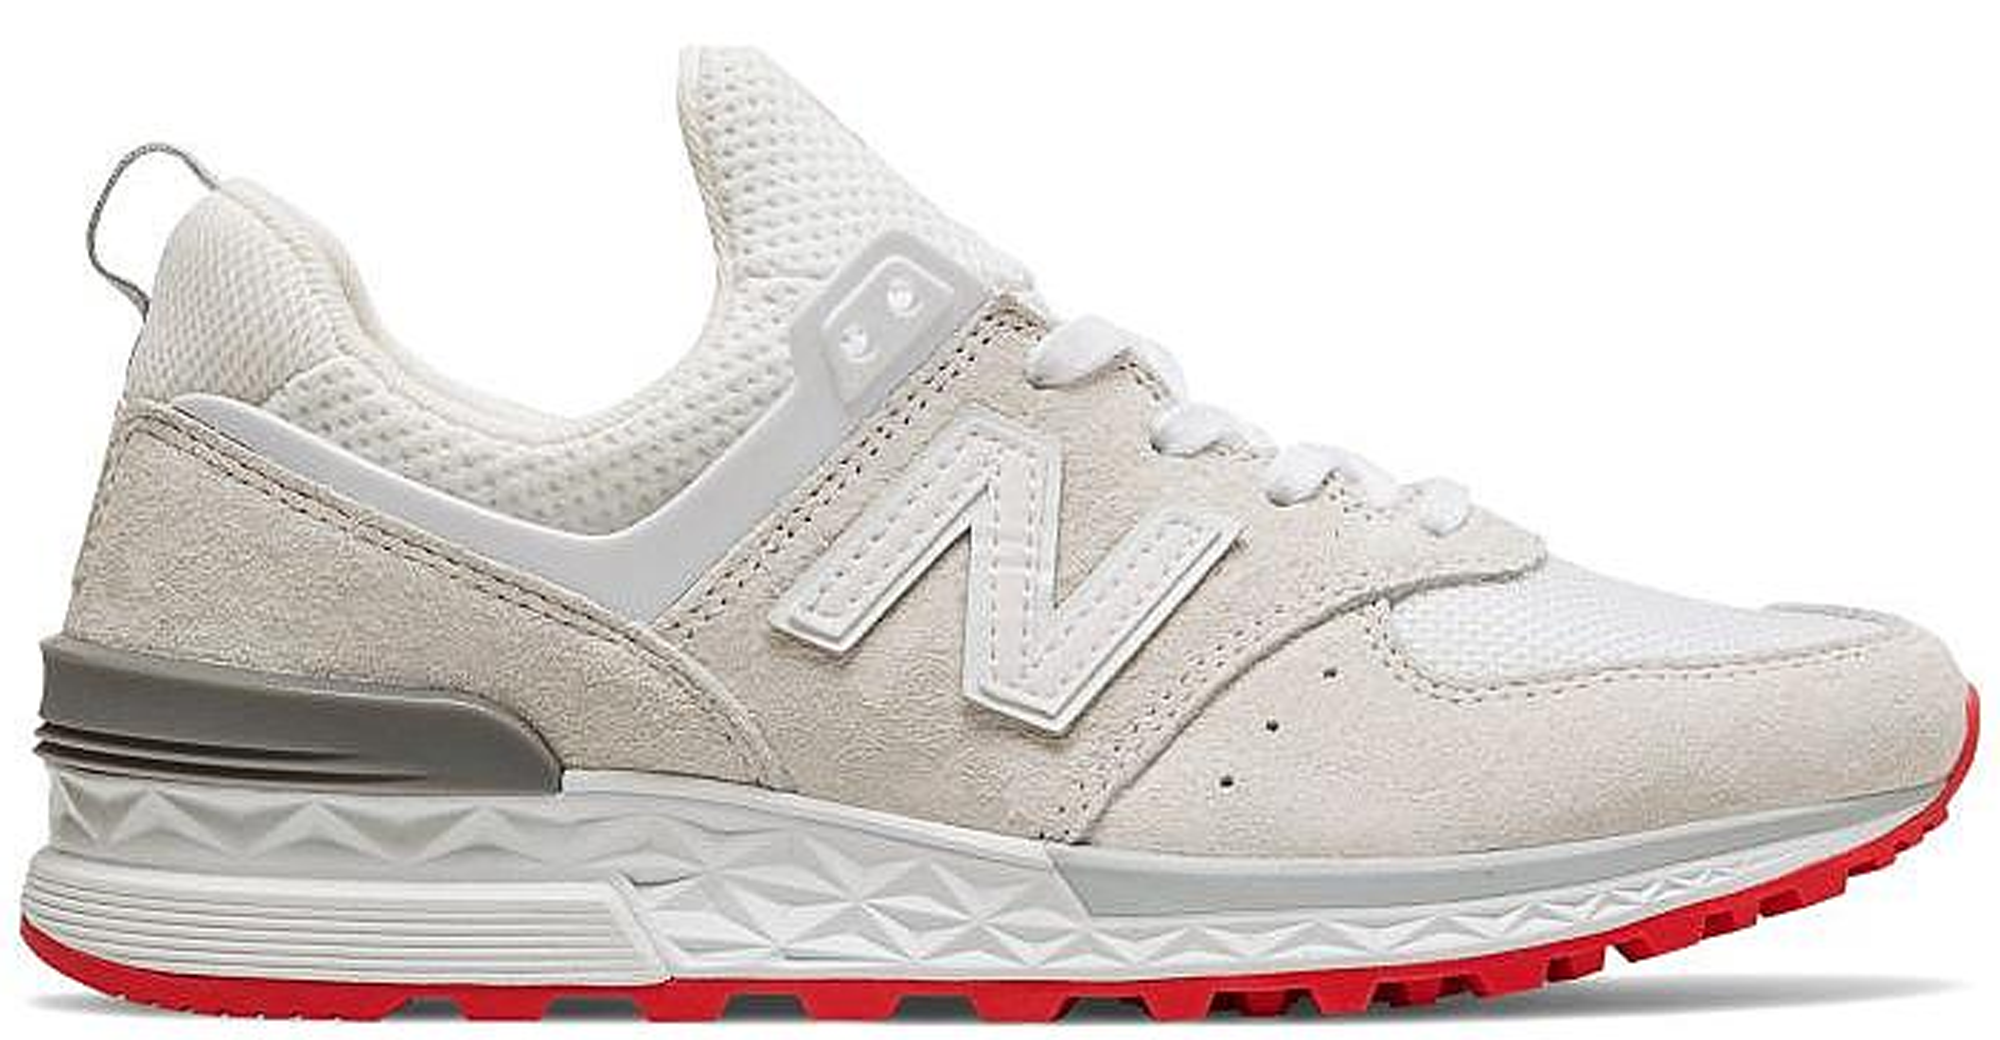 new balance 574 red and white